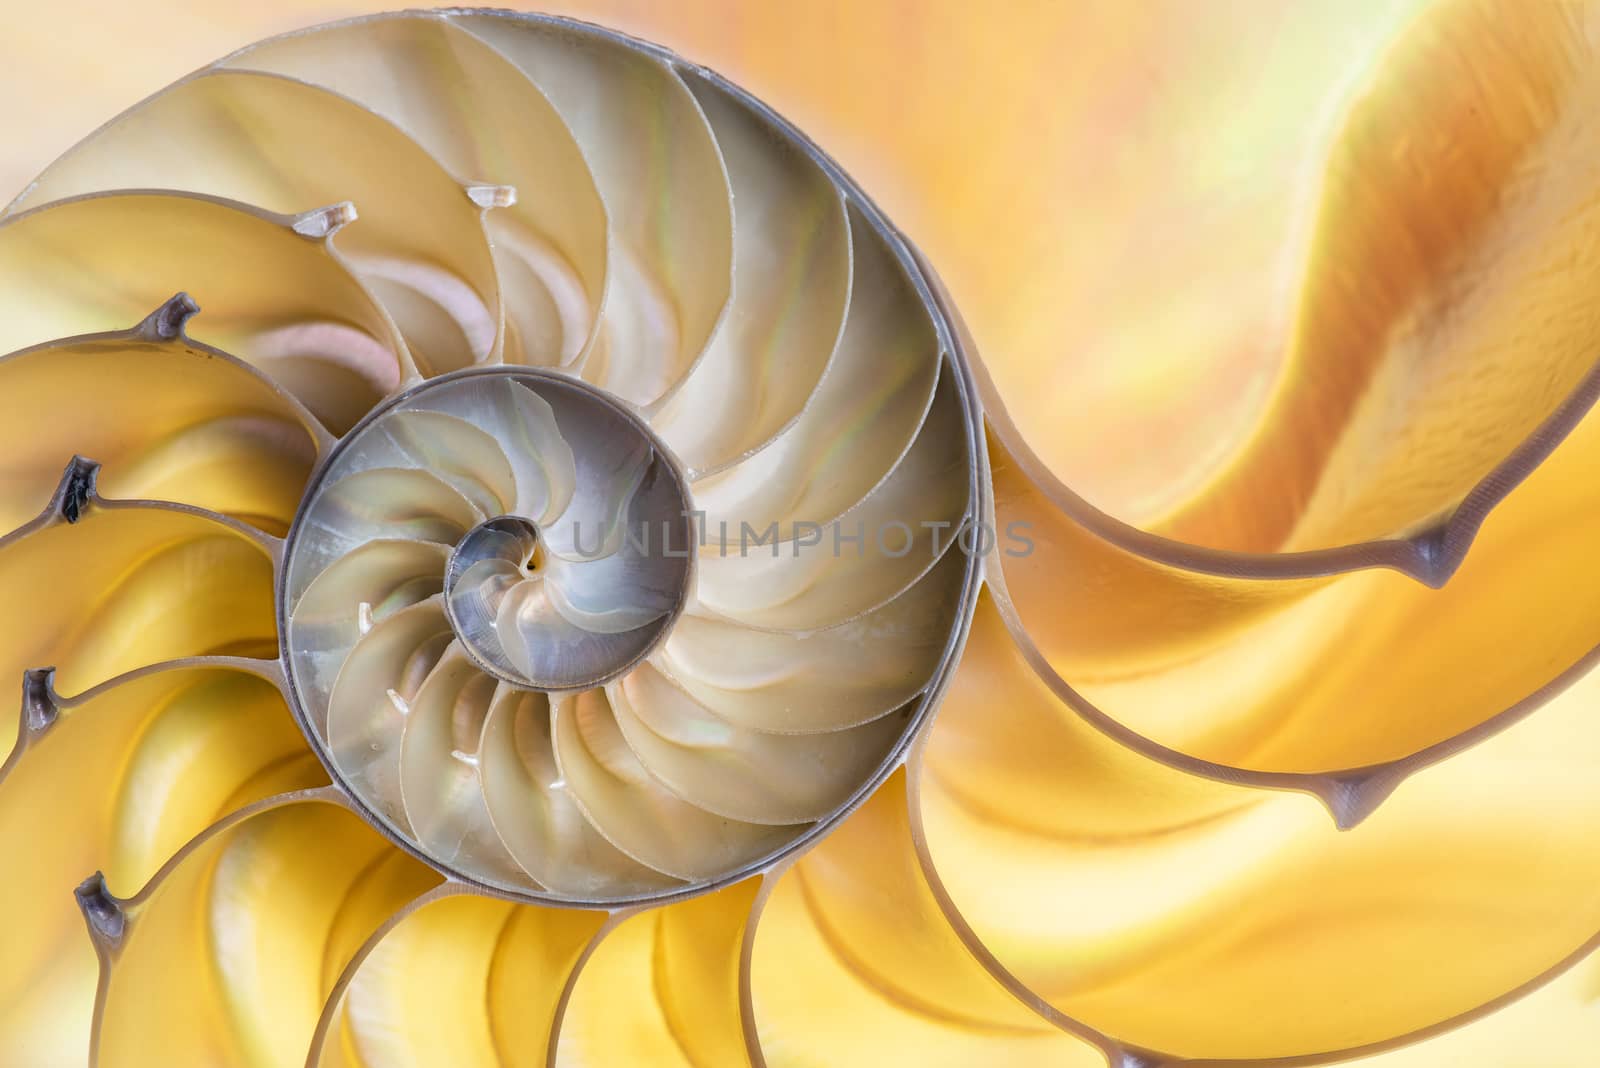 Detailed photo of a halved backlit  shell of a chambered nautilus (Nautilus pompilius) shows beautiful spiral pattern